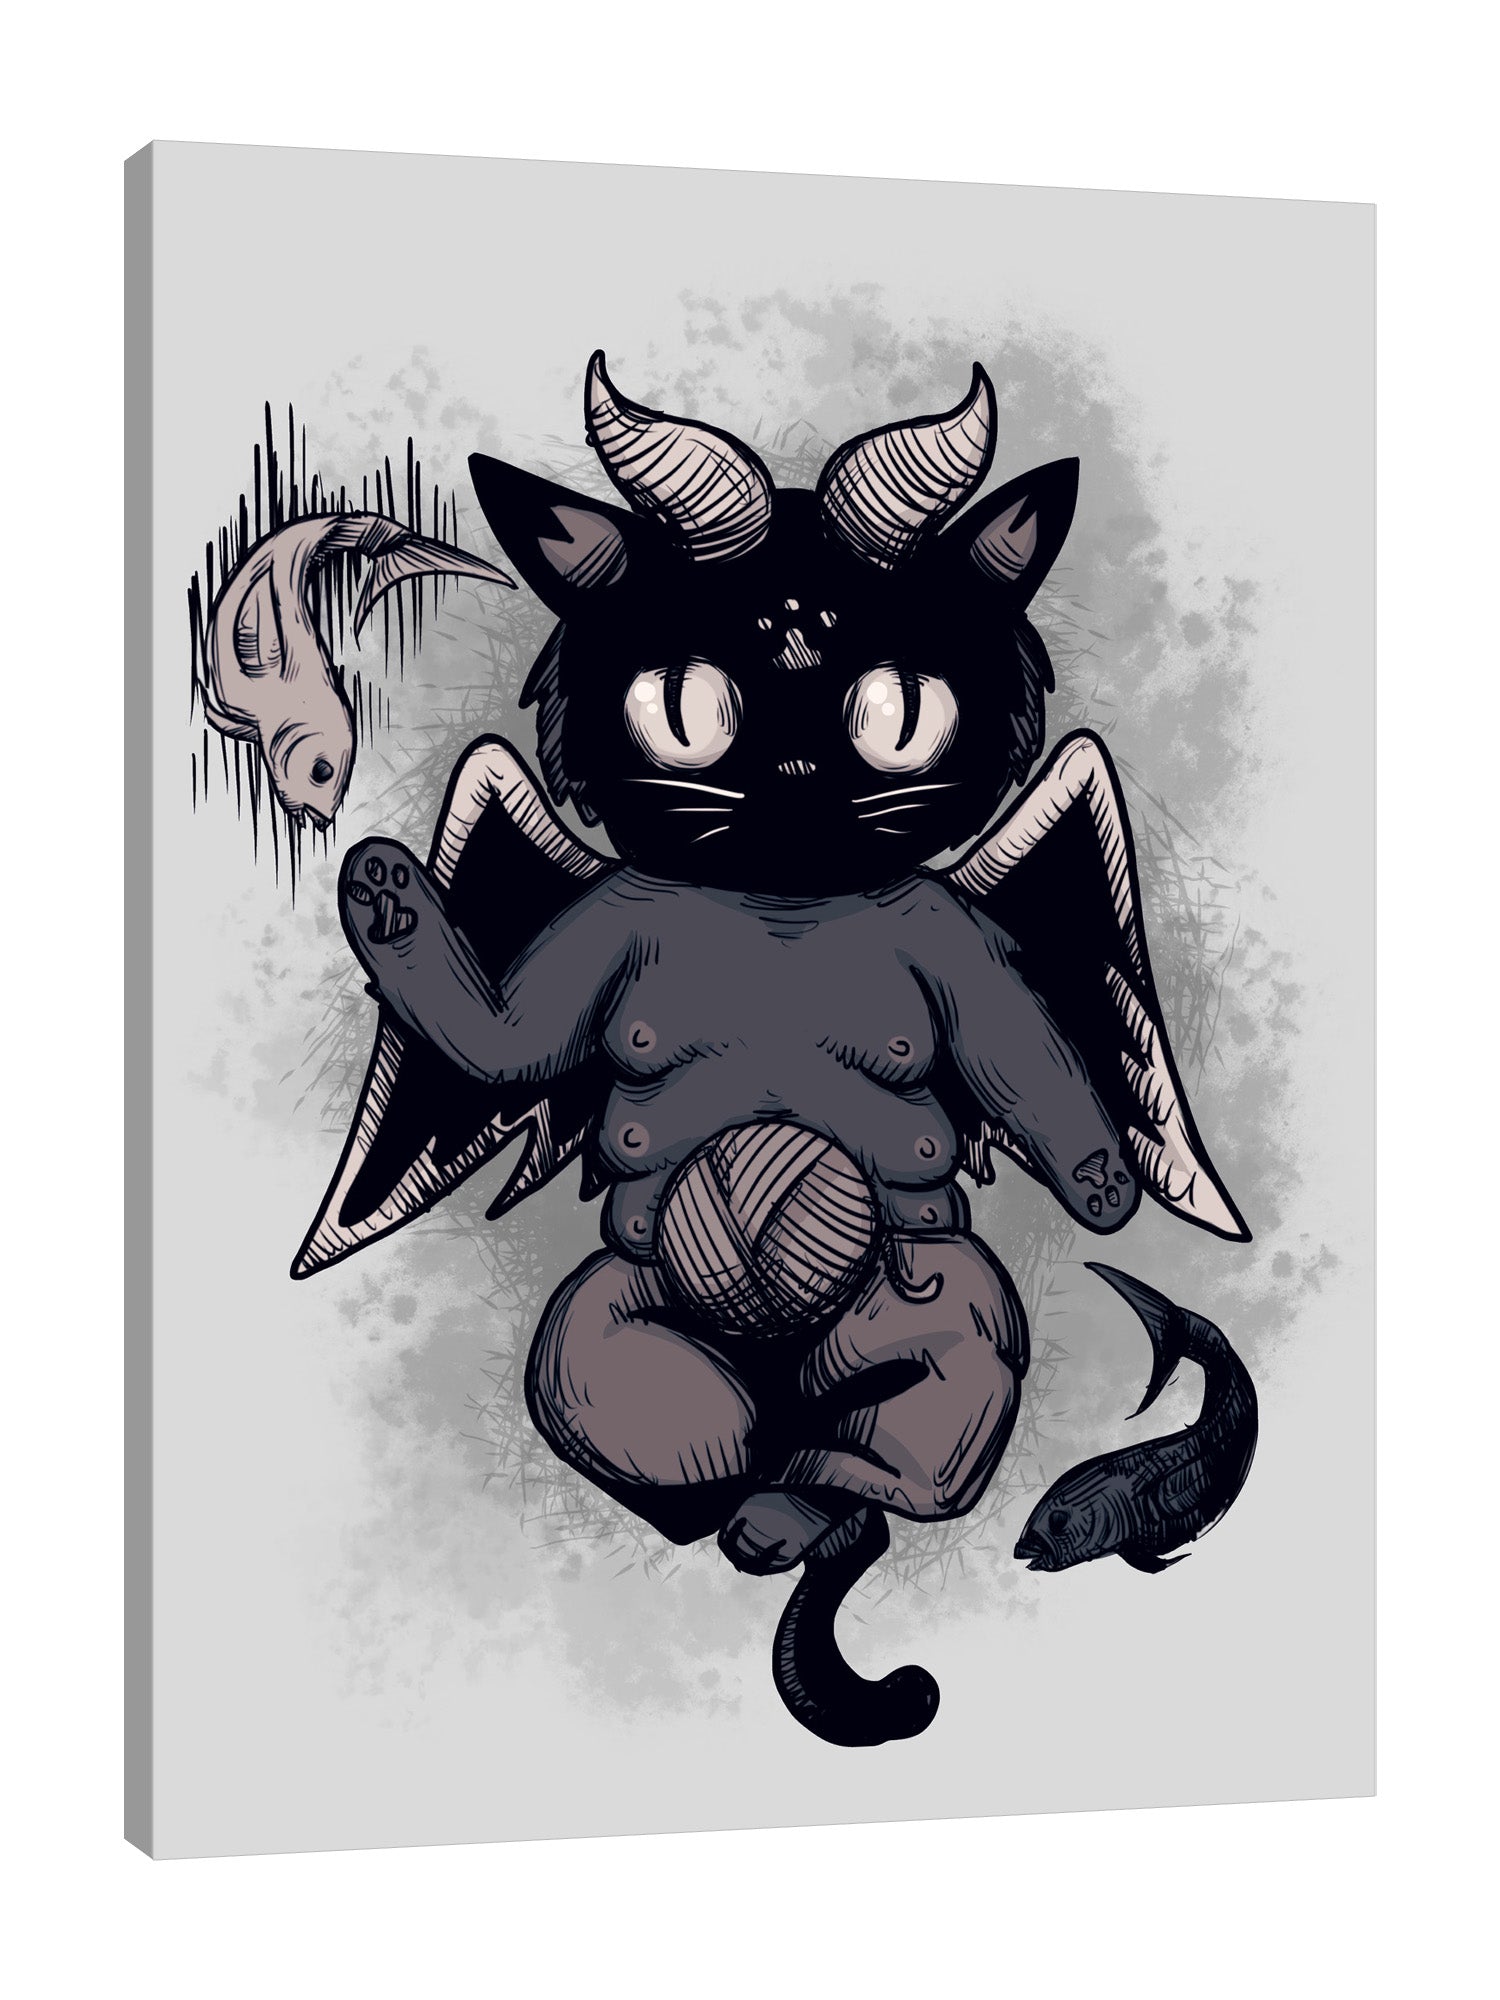 Ludwig-Van-Bacon,Vertical,3X4,Modern & Contemporary,Animals,Entertainment,Fantasy & Sci-Fi,animals,animal,cat,cats,fish,paw,paws,tail,tails,wings,wing,horns,horn,black,gray,grey,yarn,yarns,Purple,Charcoal Gray,White,Black,Gray